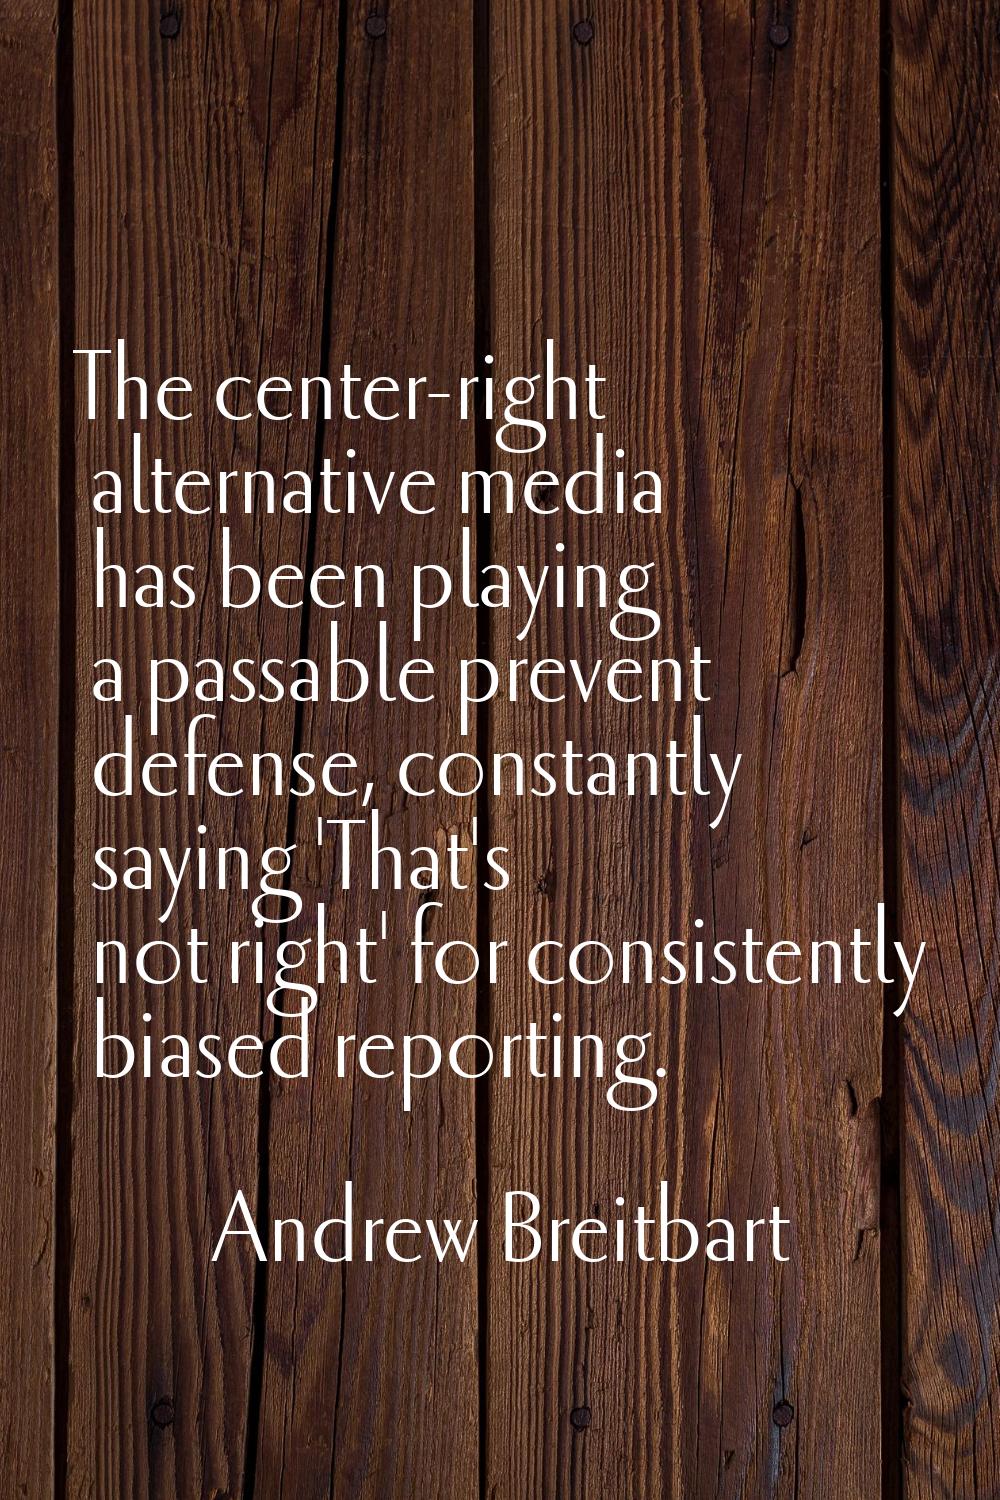 The center-right alternative media has been playing a passable prevent defense, constantly saying '